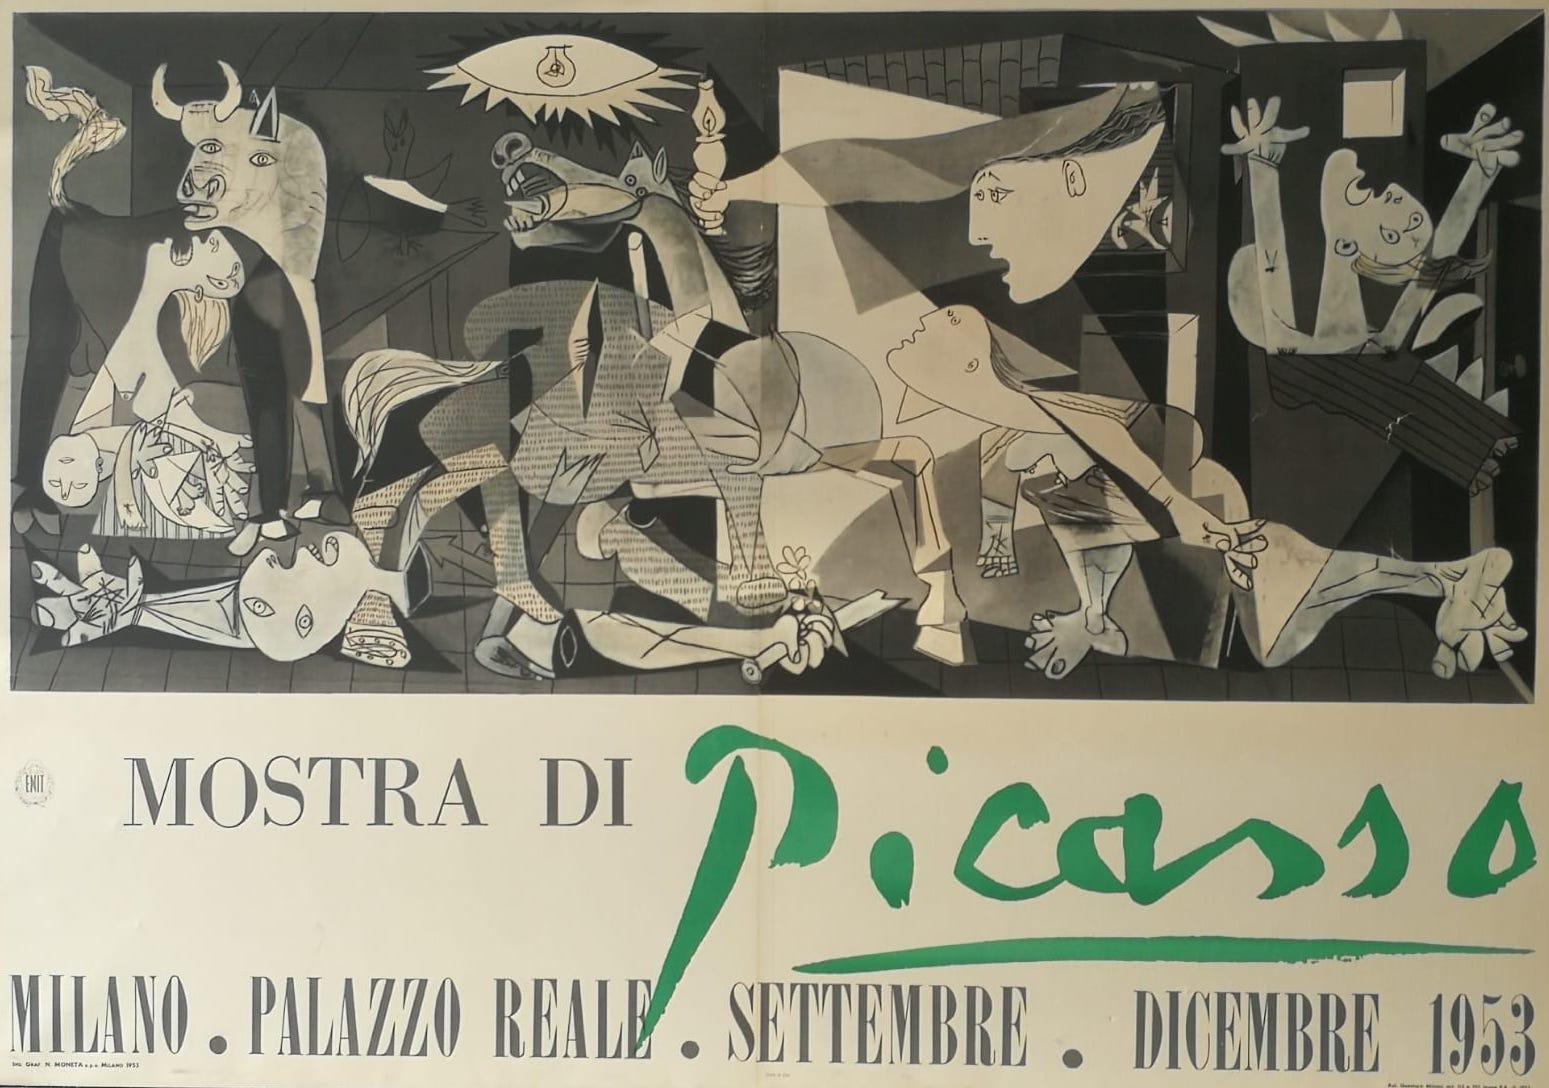 (after) Pablo Picasso Print - Picasso exhibition poster, "Mostra di Picasso, " depicting Guernica - 1953